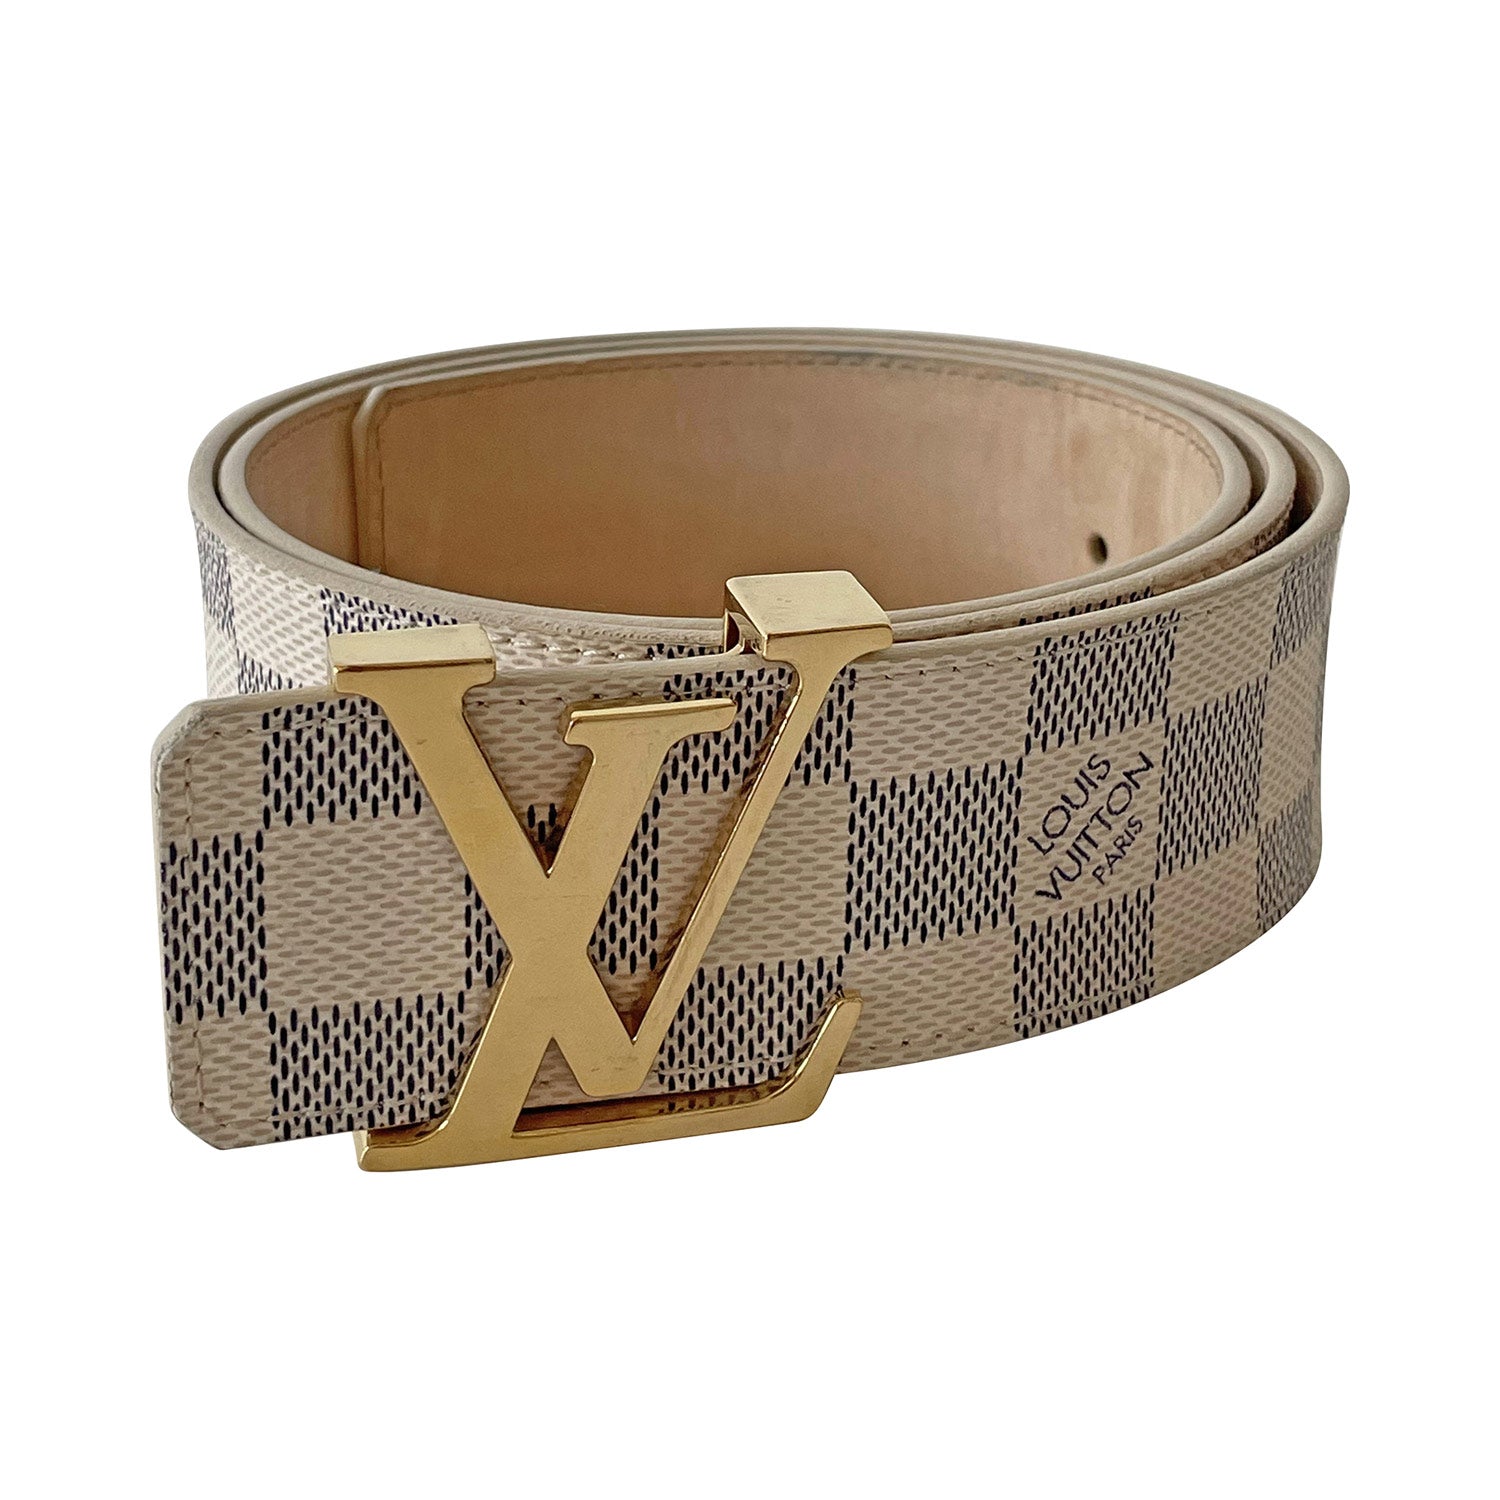 Louis Vuitton belt in black leather with logo buckle  DOWNTOWN UPTOWN  Genève